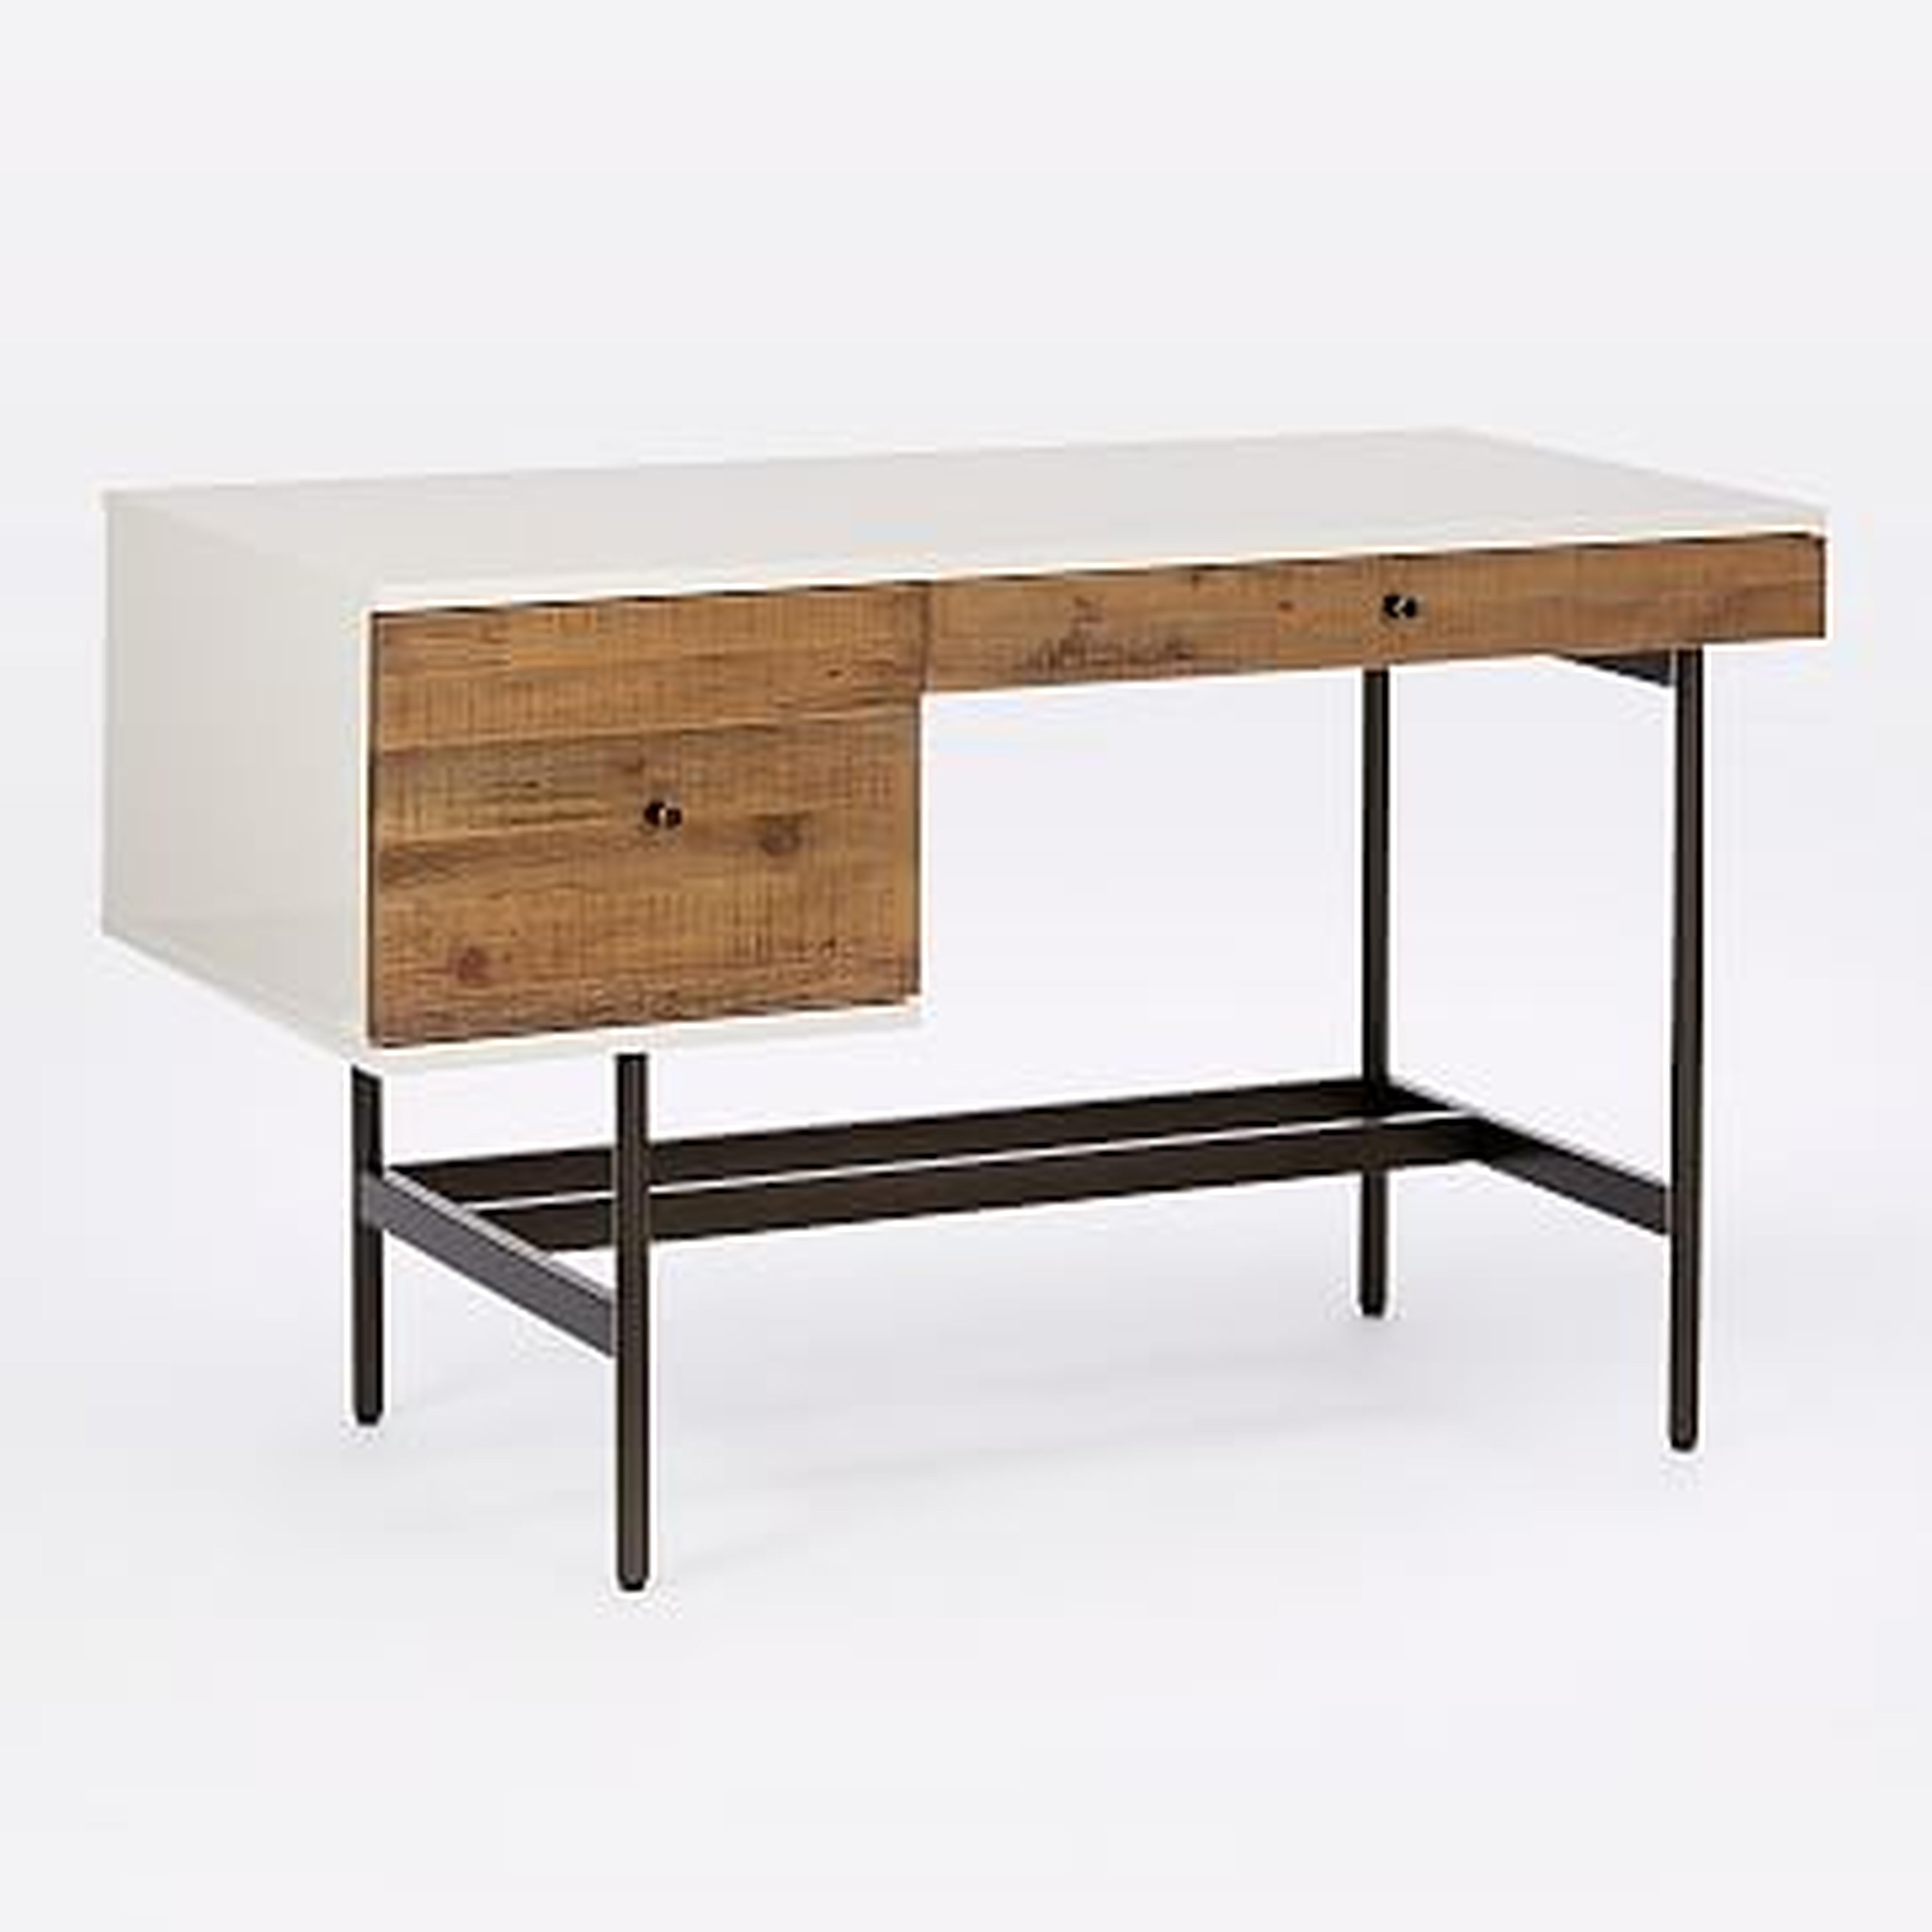 Reclaimed Wood + Lacquer Storage Desk - Reclaimed Wood/White - West Elm